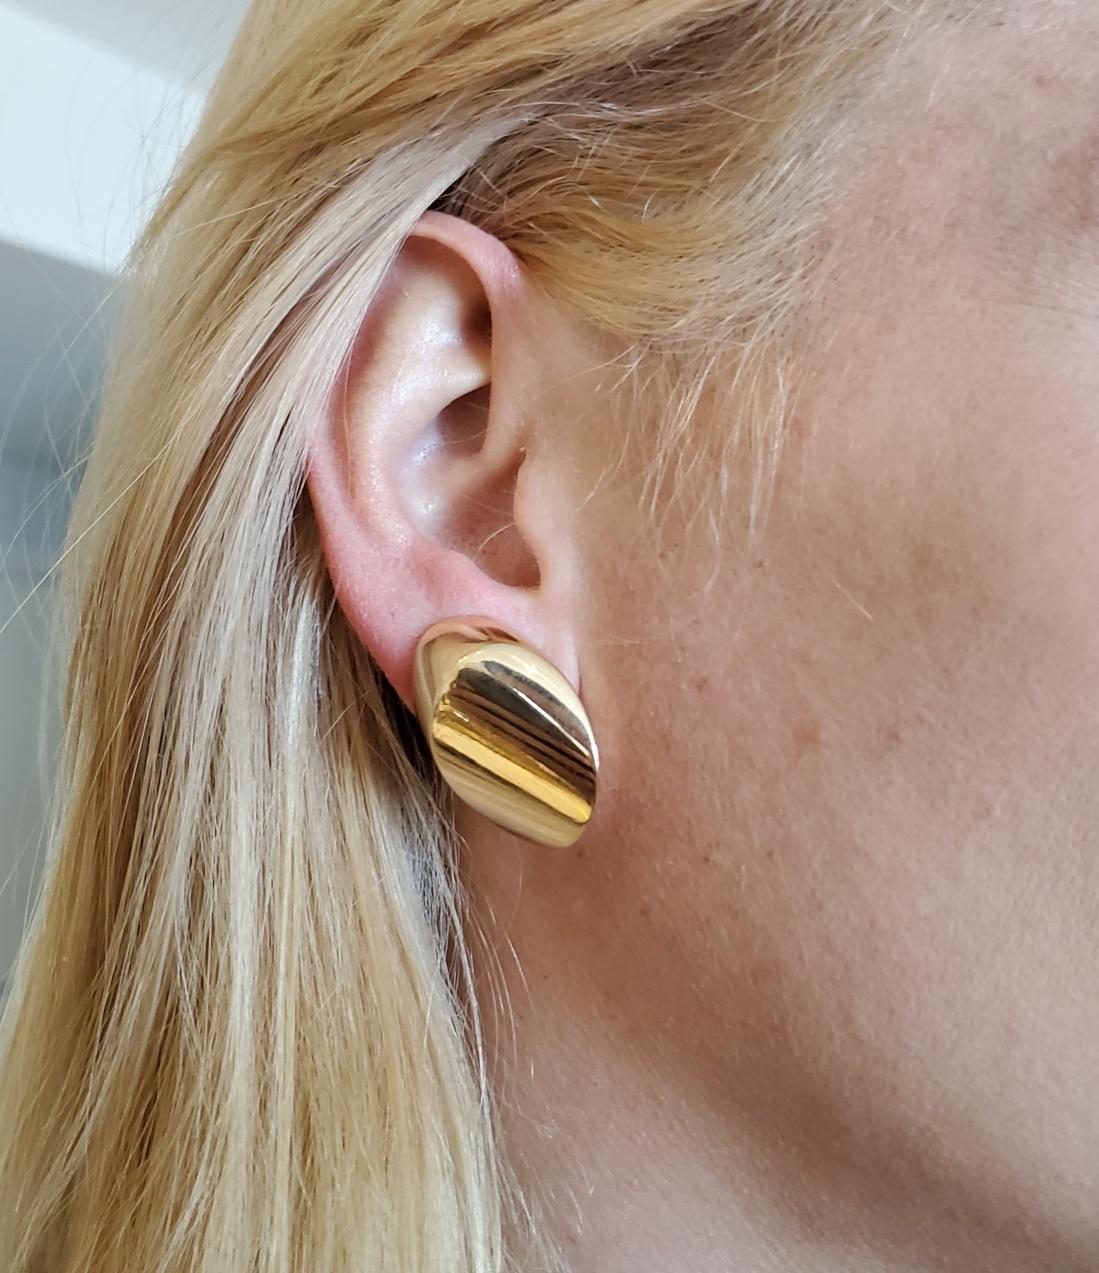 Sculptural three dimensional earrings designed by Vhernier.

Terrific pair of ultra modernist earrings, created in Milano Italy by the jewelry house of Vhernier. These pair has been crafted in three dimensions, with bold sculptural volumes in solid